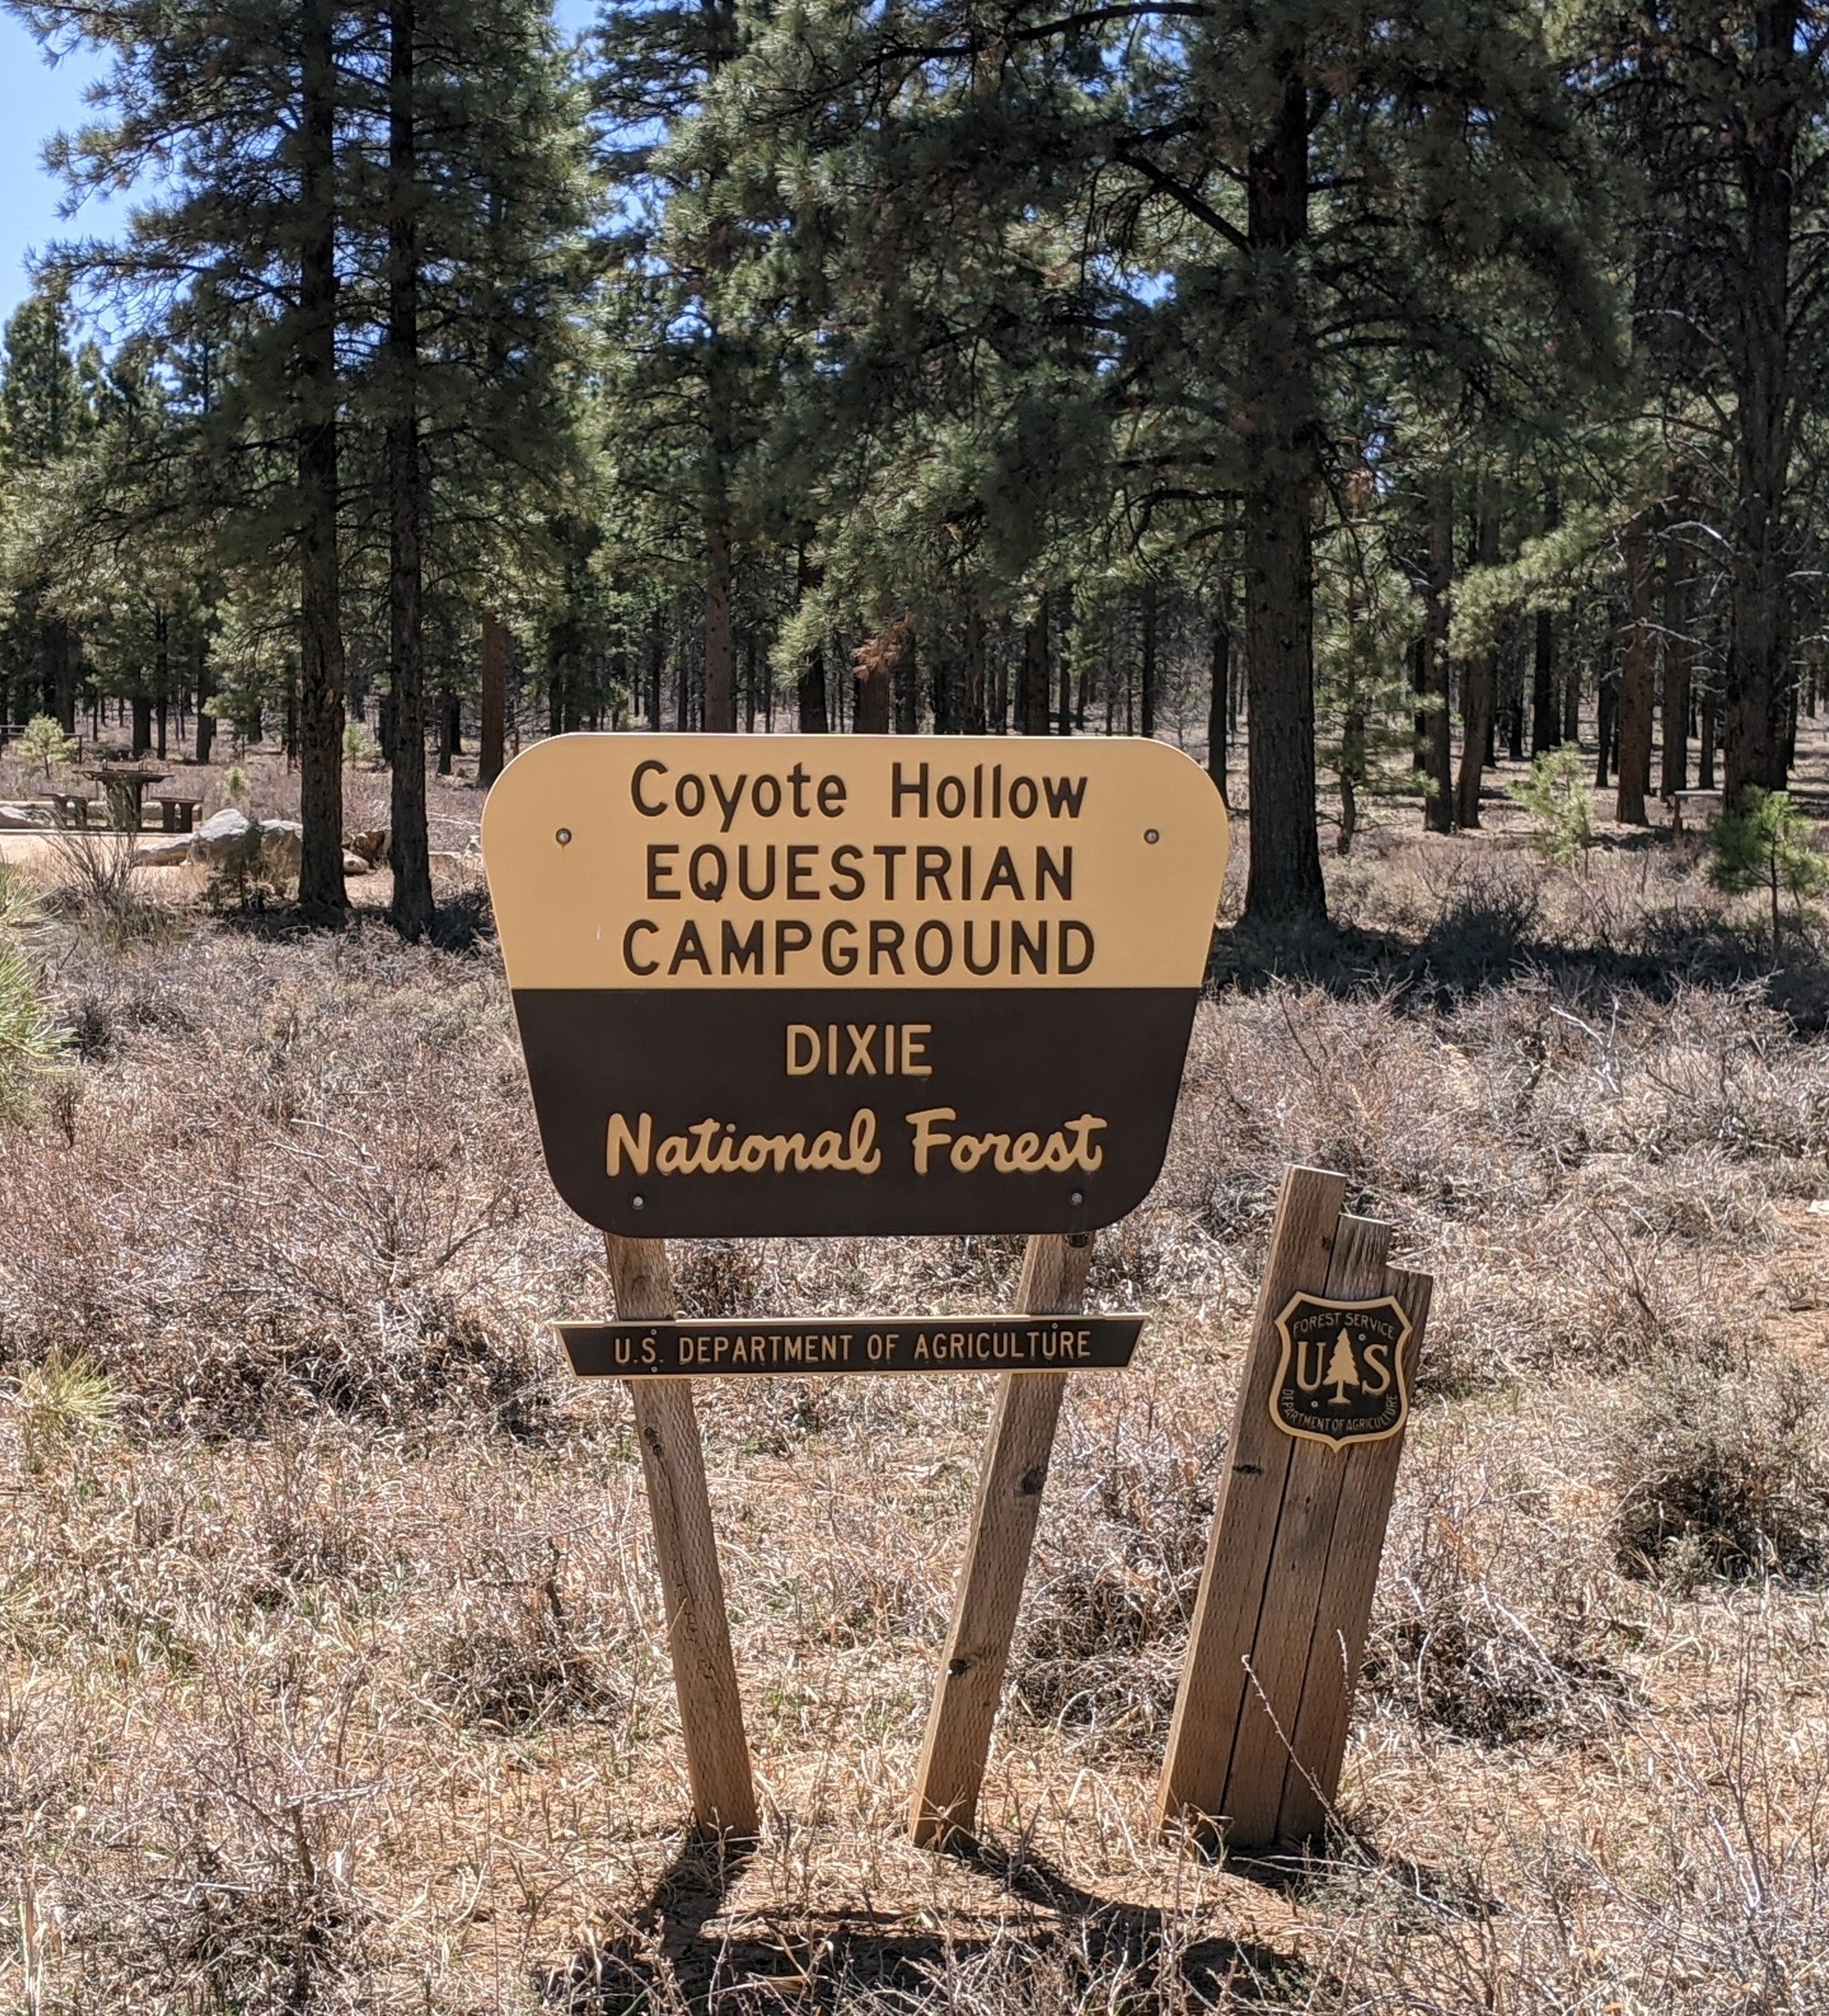 Camper submitted image from Coyote Hollow Equestrian Campground - 4